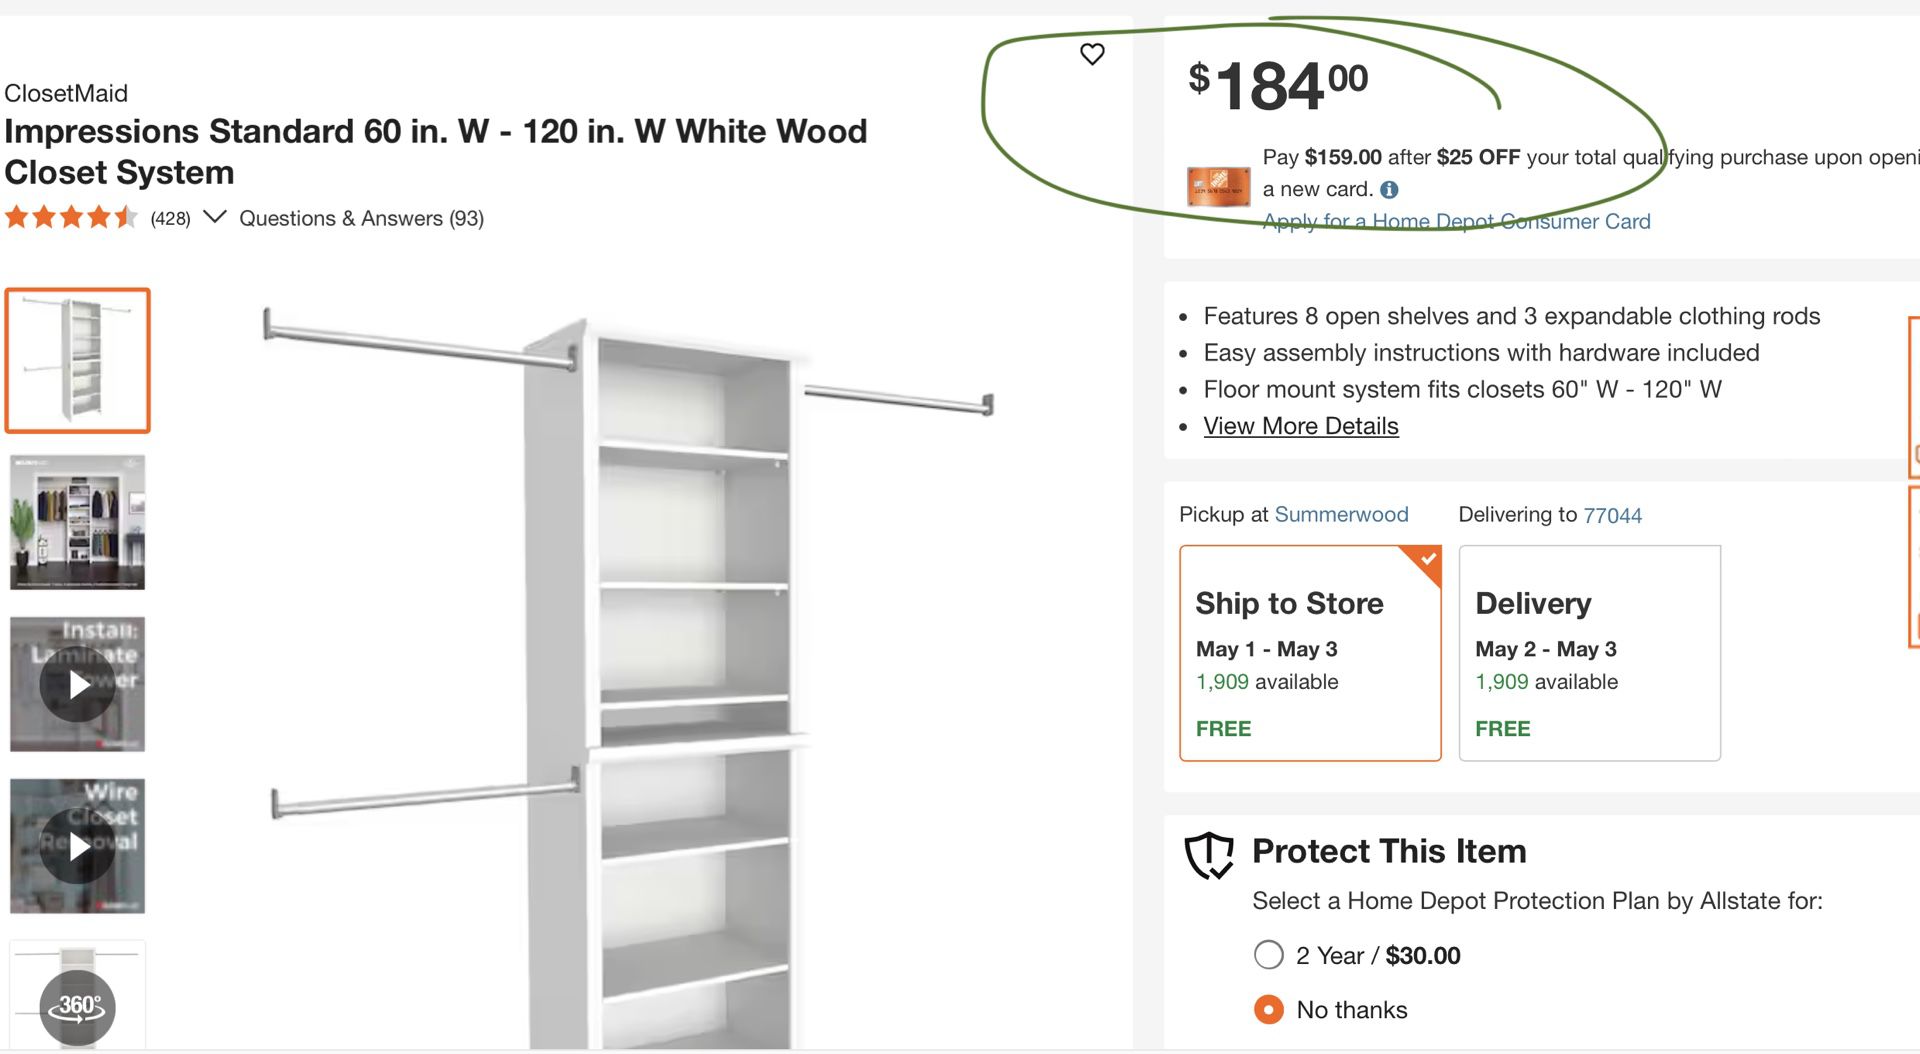 Partial - Impressions Standard 60 in. W - 120 in. W White Wood Closet System. 126